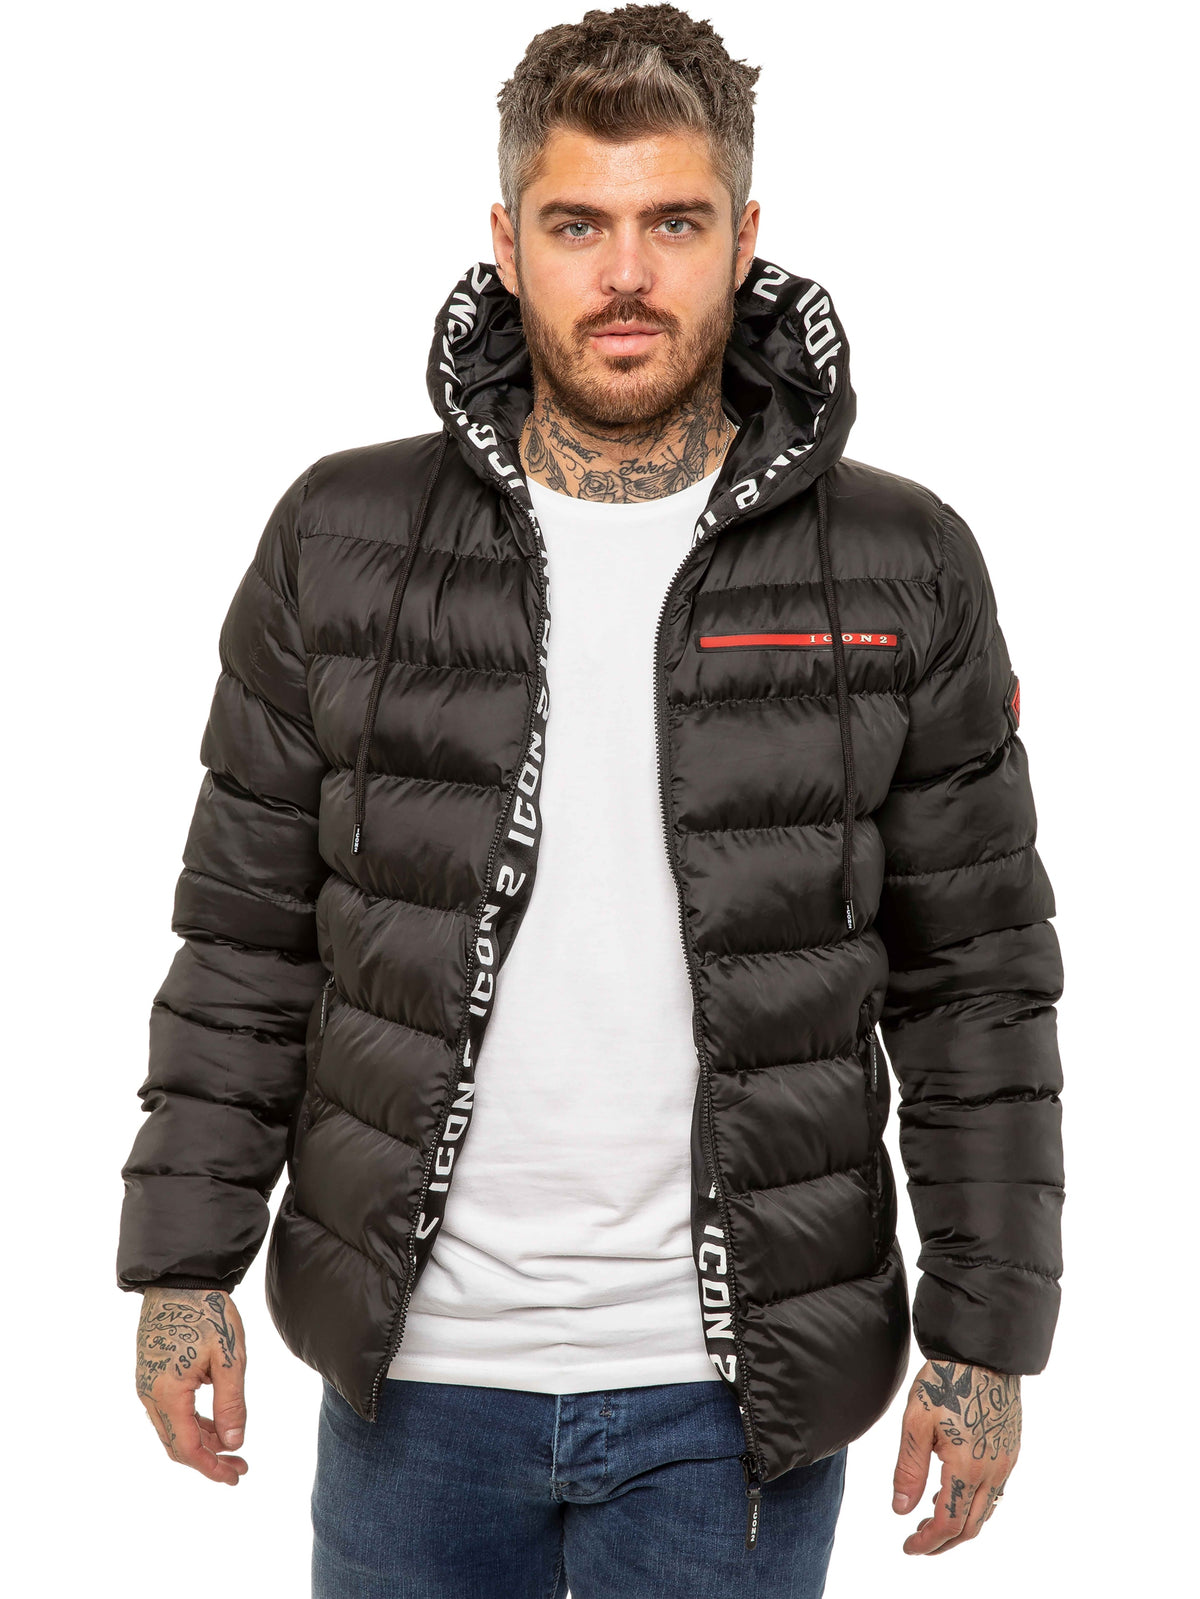 MENS ICON JACKET Icon Mens Puffer Hooded Zip Up Winter Jacket GUEST BRAND RAWDENIM